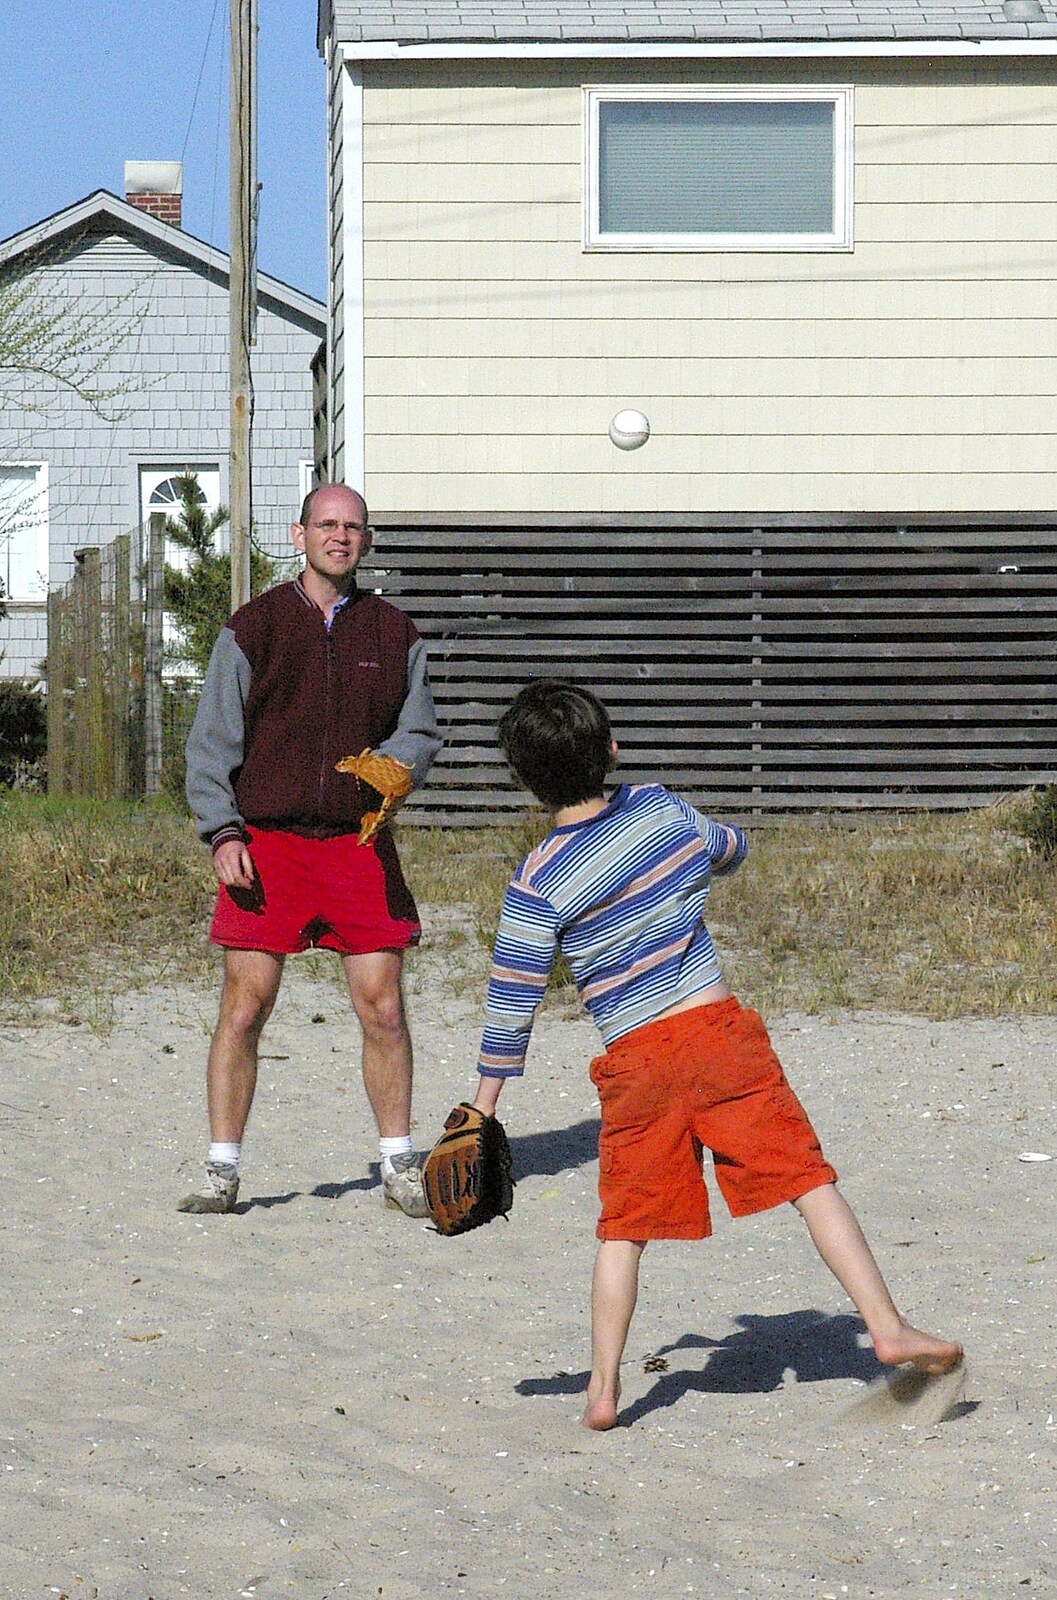 More baseball pitching action from Phil and the Fair Harbor Fire Engine, Fire Island, New York State, US - 30th April 2006